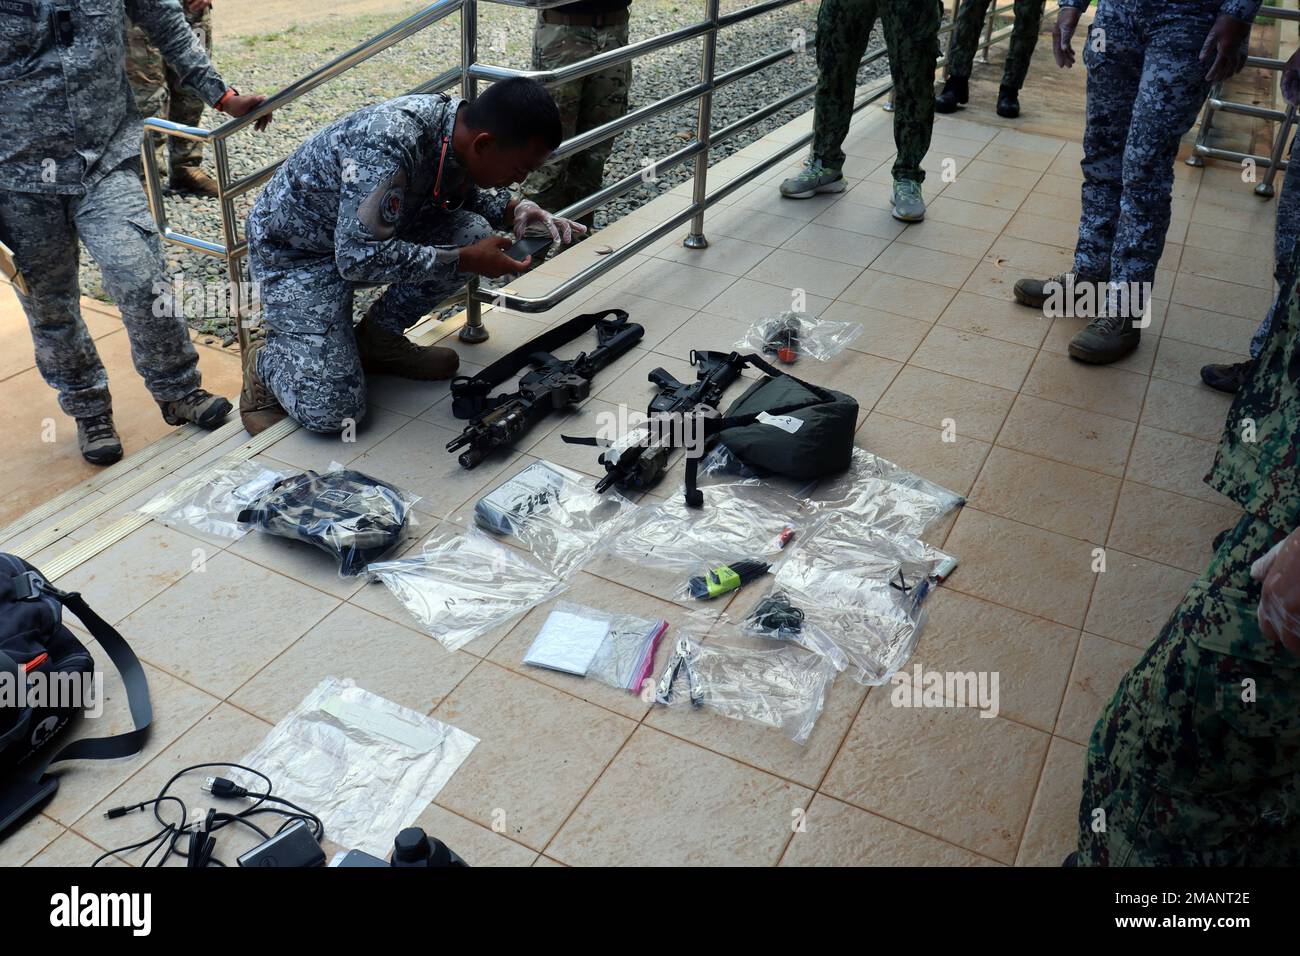 A member of the Philippine Coast Guard Special Operations Force photographs notional contraband during a sensitive site exploitation demonstration with 1st Special Forces Group (Airborne) Green Berets on June 1, 2022, near Puerto Princesa, Palawan. This engagement provided an opportunity for the Philippine National Police, Philippine Coast Guard Special Operations Force and U.S. Green Berets to exchange tactics, techniques and procedures with each other in an effort to enhance interoperability while sharing new ideas for maritime operations. Other TTP’s exchanged during the engagement included Stock Photo